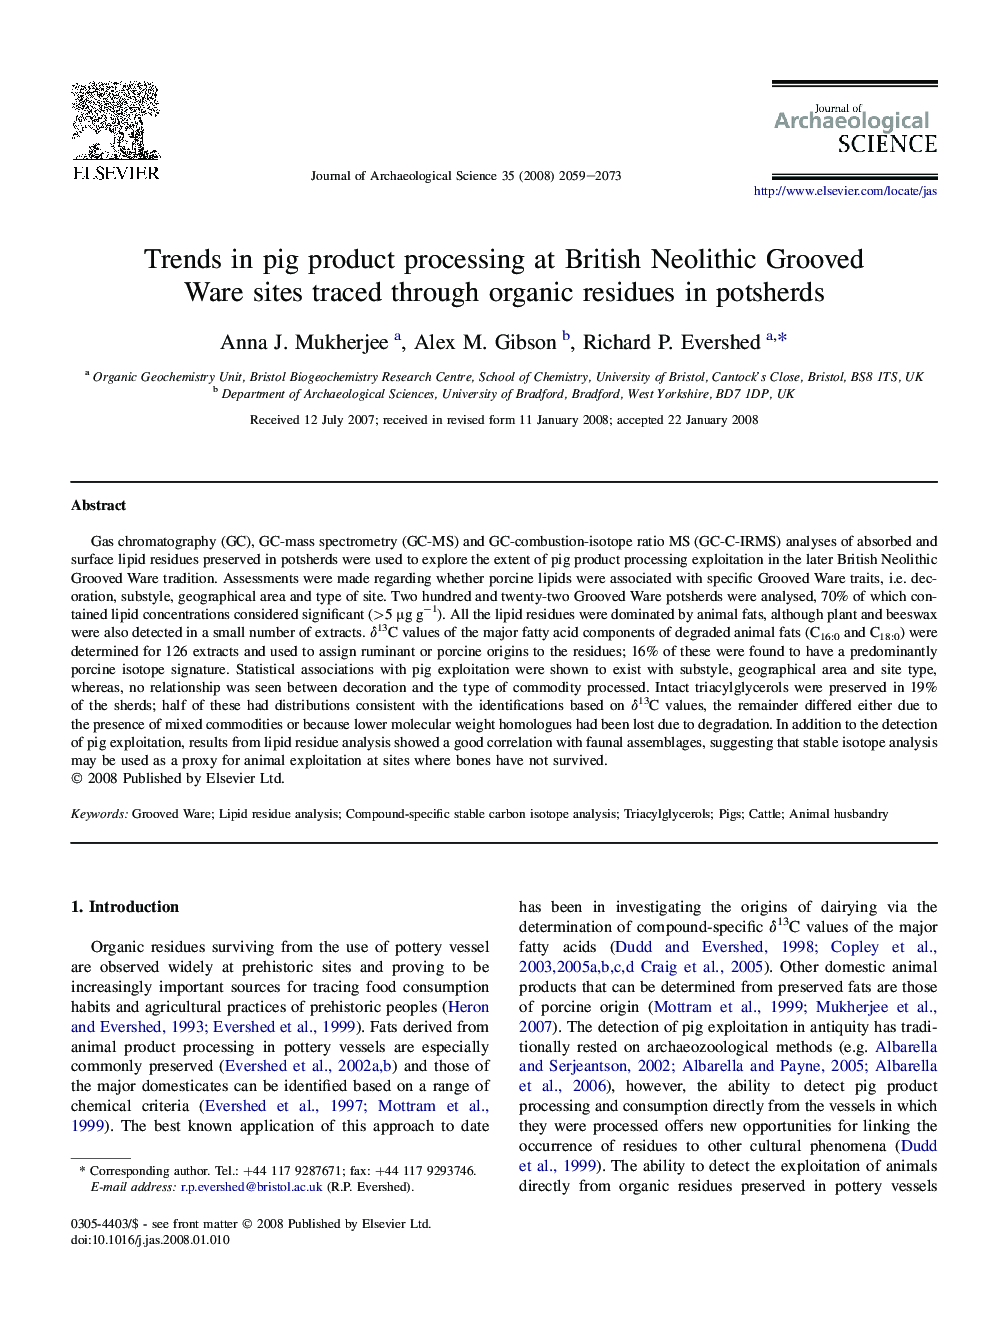 Trends in pig product processing at British Neolithic Grooved Ware sites traced through organic residues in potsherds